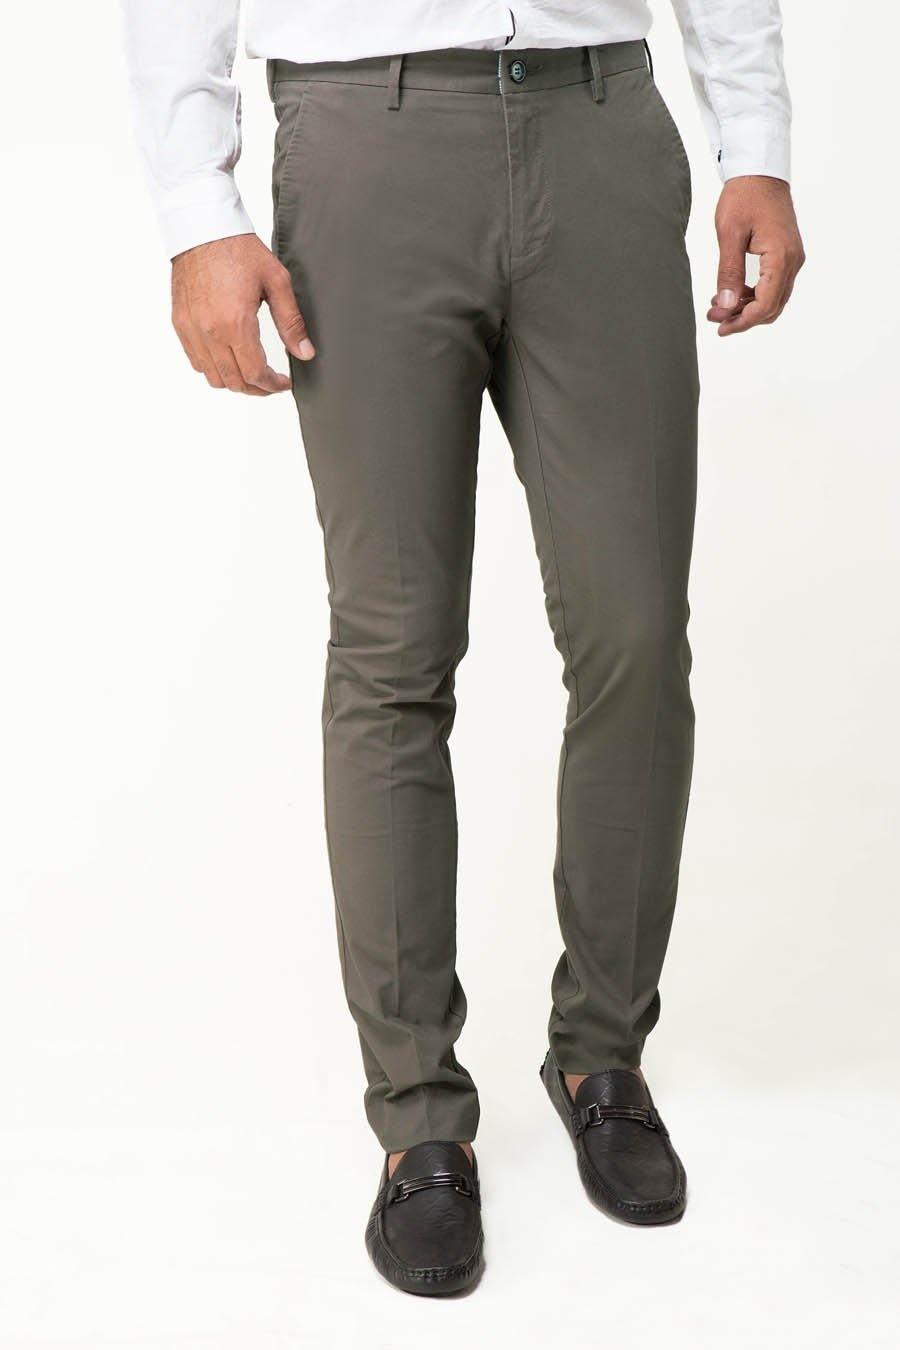 Casual Pant Cross Pocket Mouse Color -Slim Fit at Charcoal Clothing